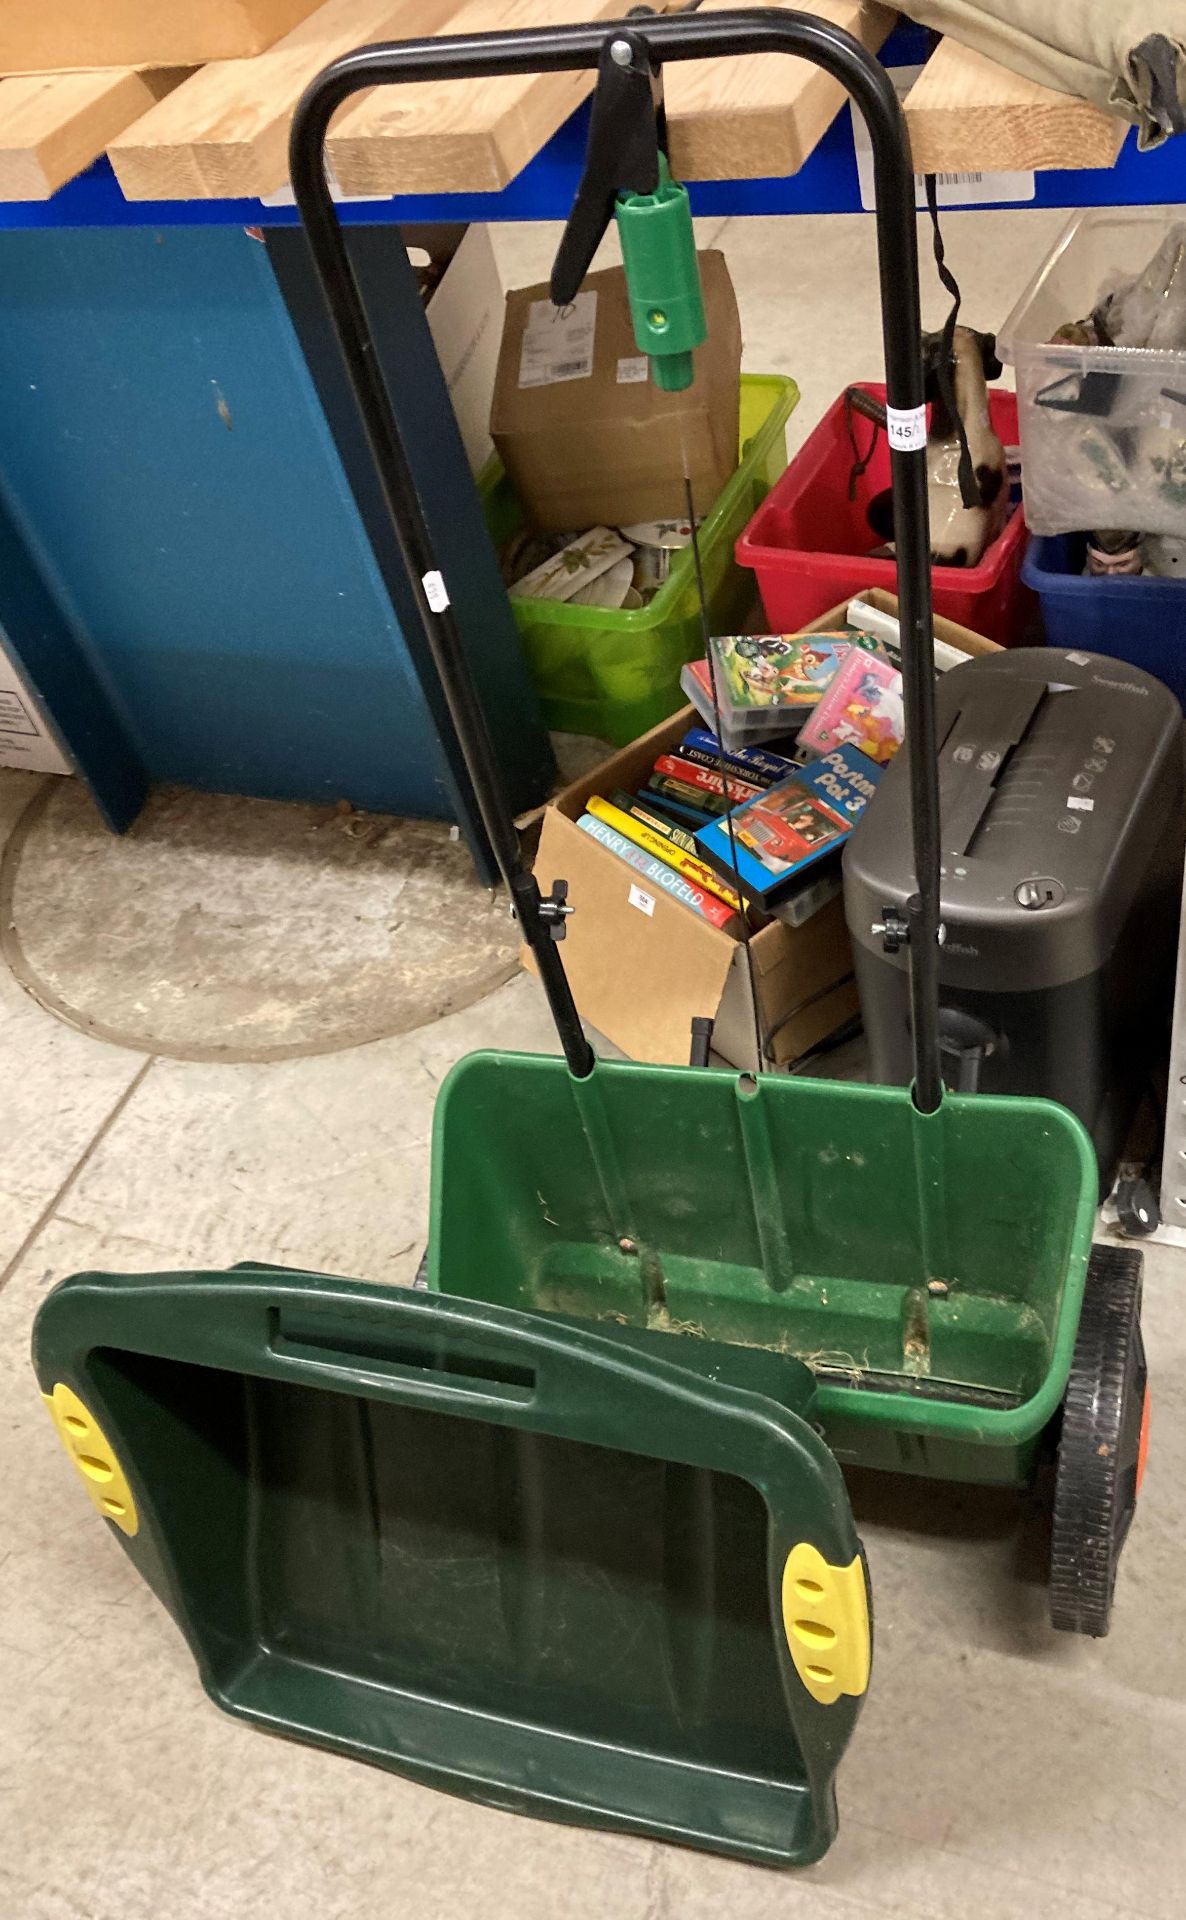 A Scotts Evergreen two-wheel spreader and a green plastic garden tray (2) (saleroom location: S06)